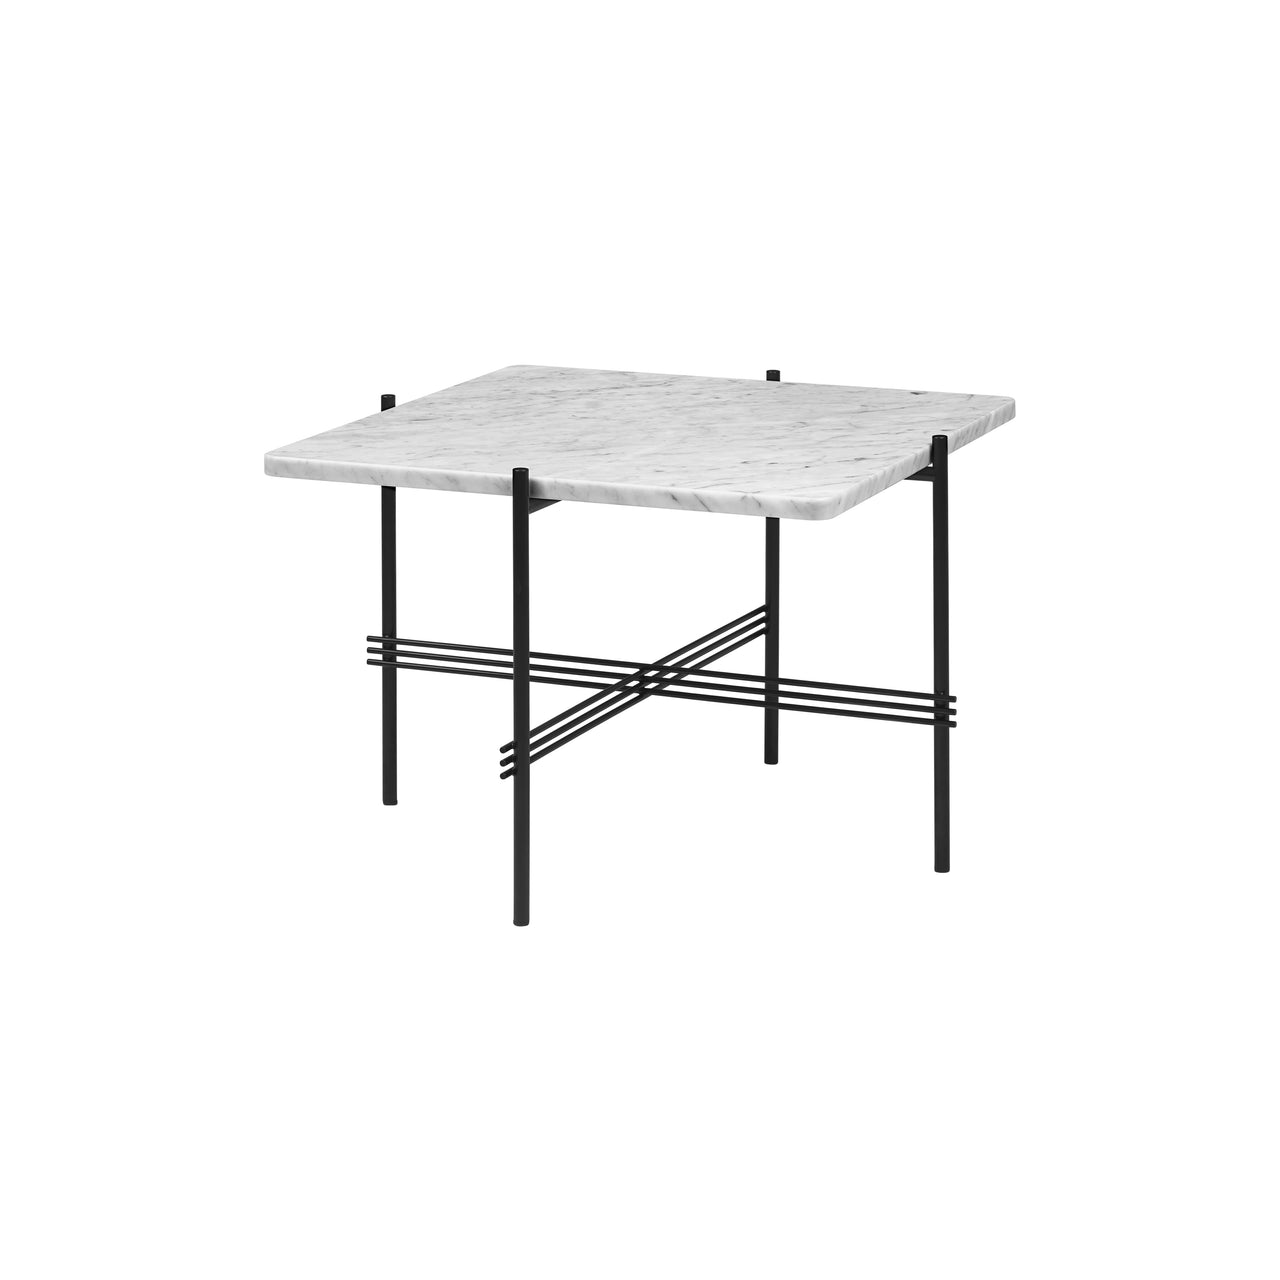 TS Square Coffee Table: Small - 21.7